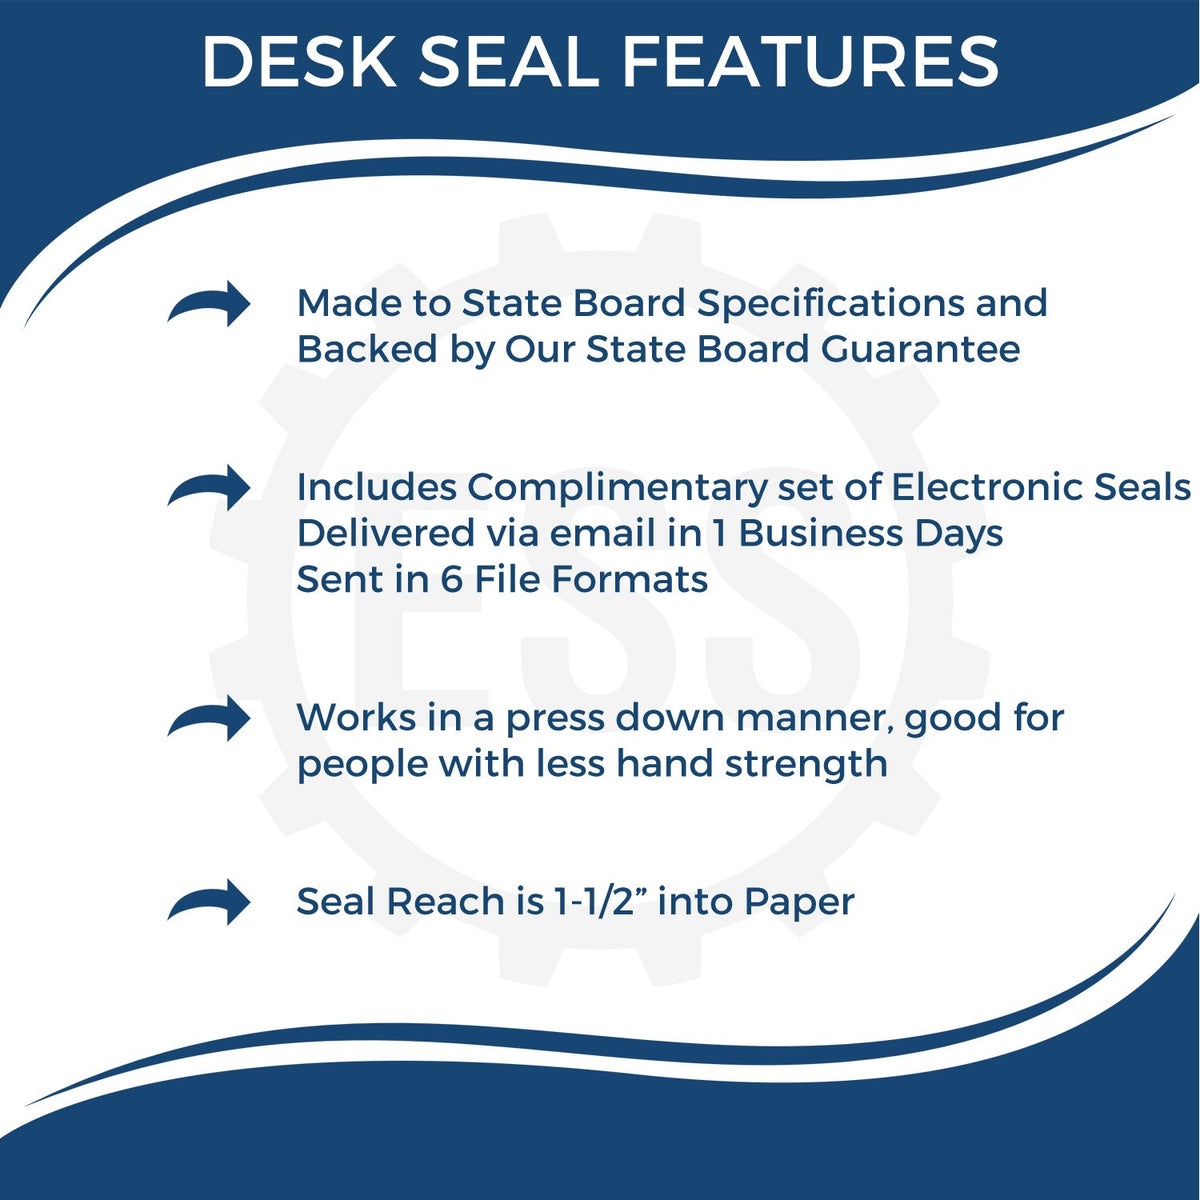 New Mexico Engineer Desk Seal